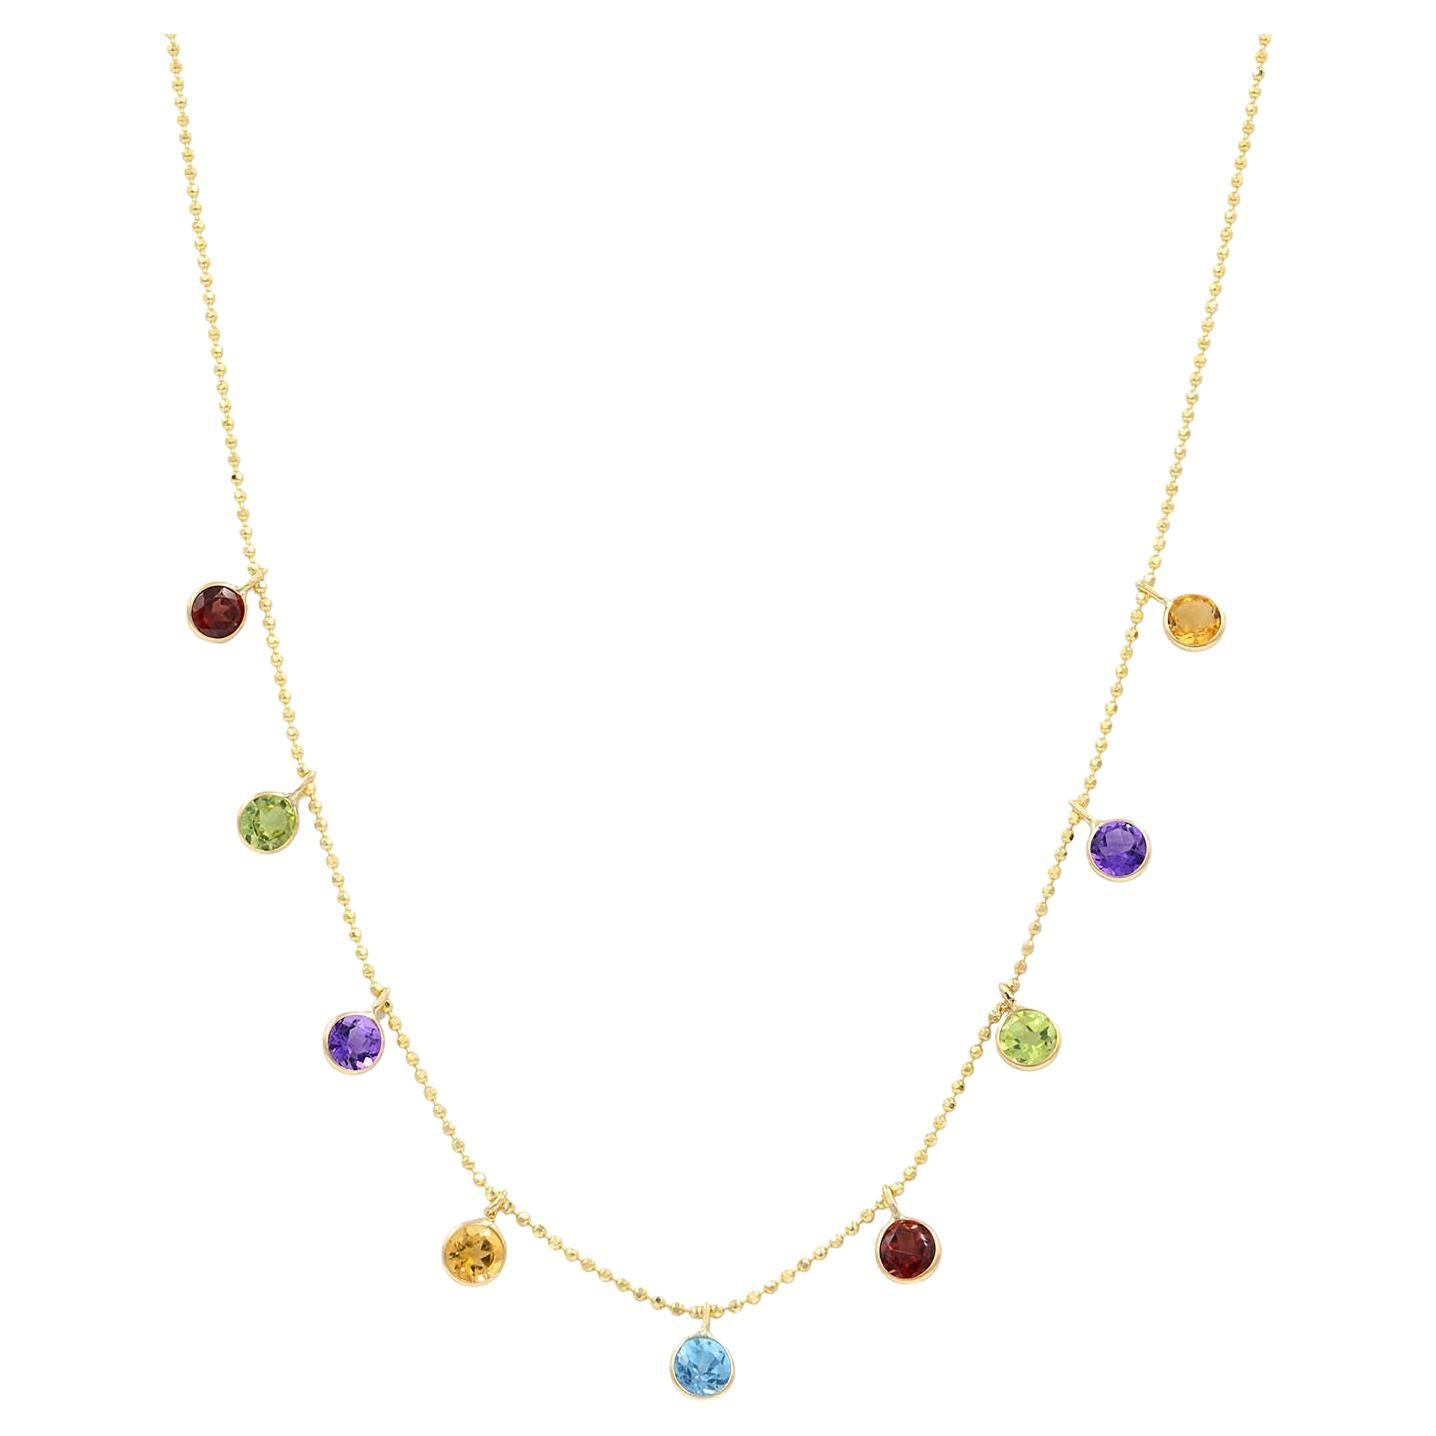 Rachel Koen Gemstone by The Yard Chain Necklace 14K Yellow Gold For Sale